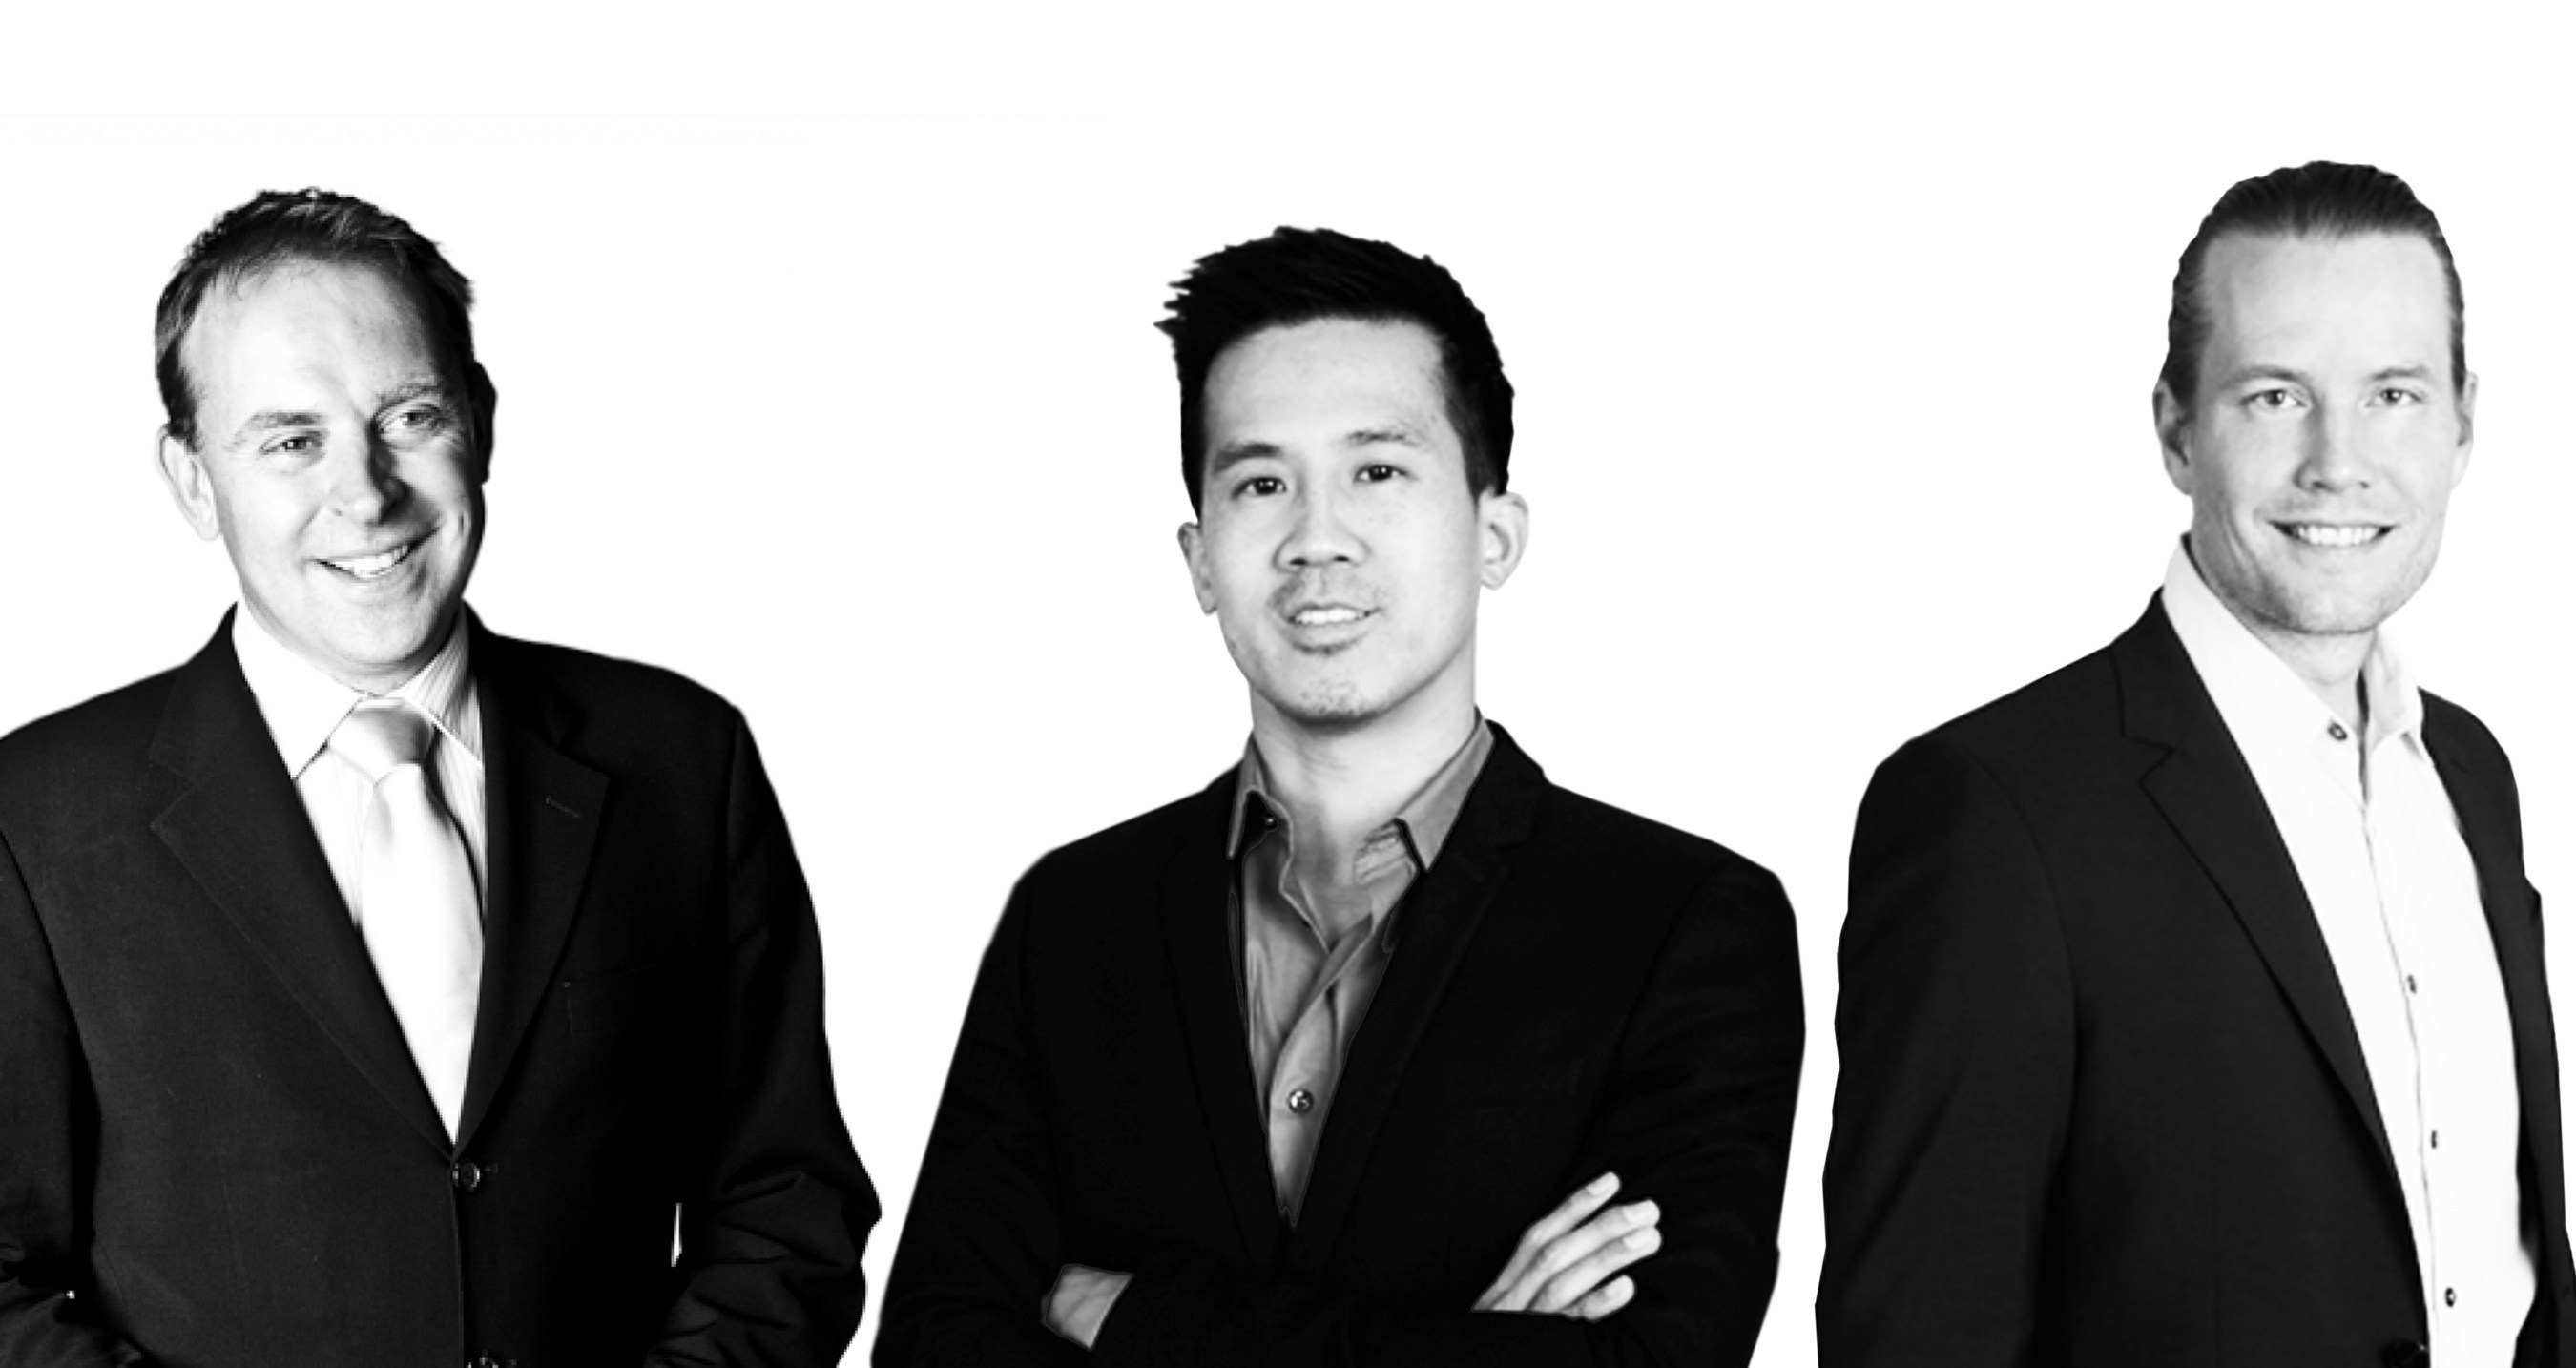 Market Tech Strategic Investment in glispa: Charles Butler CEO Market Tech Holdings (left), Gary Lin Founder & CEO glispa (center), Tim Nilsson Co-Founder & Managing Director (right)